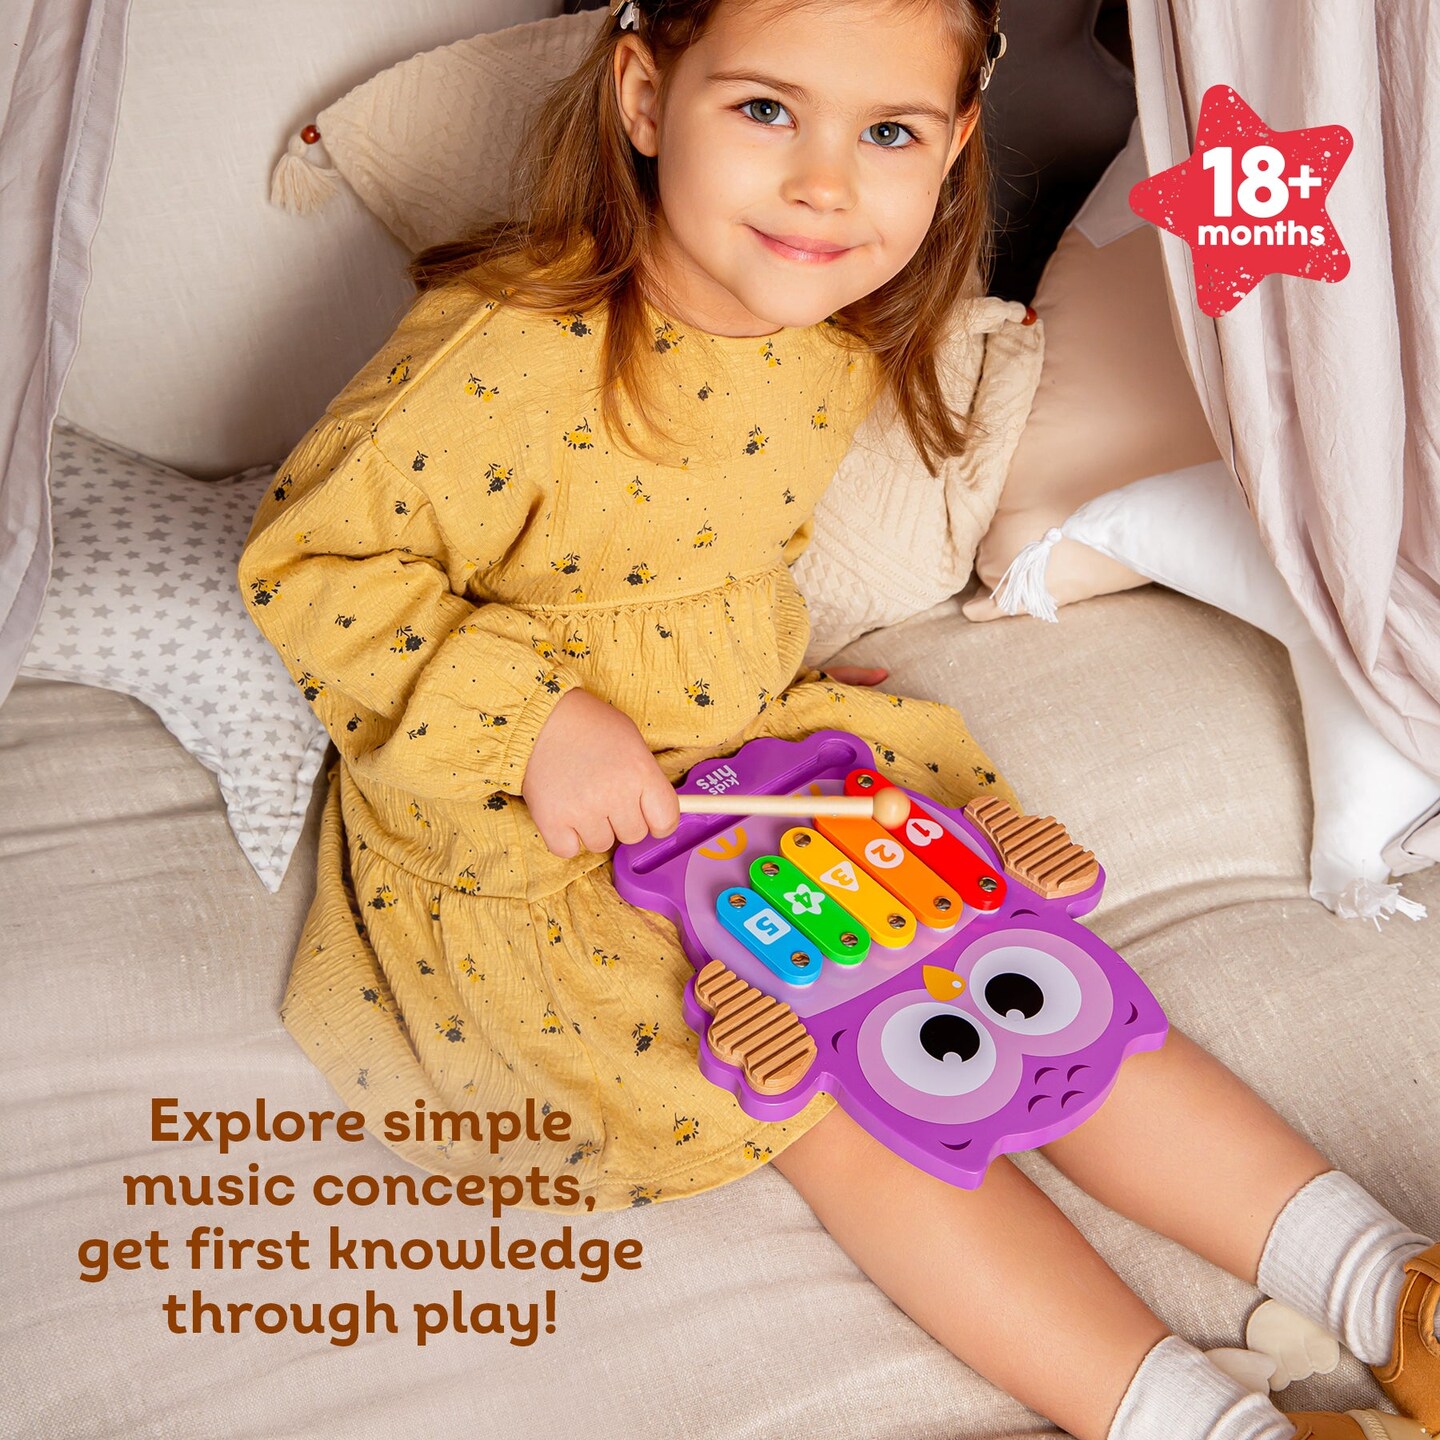 Kids Hits: Harmonize Playtime with the Wooden Owl Xylophone Adventure!